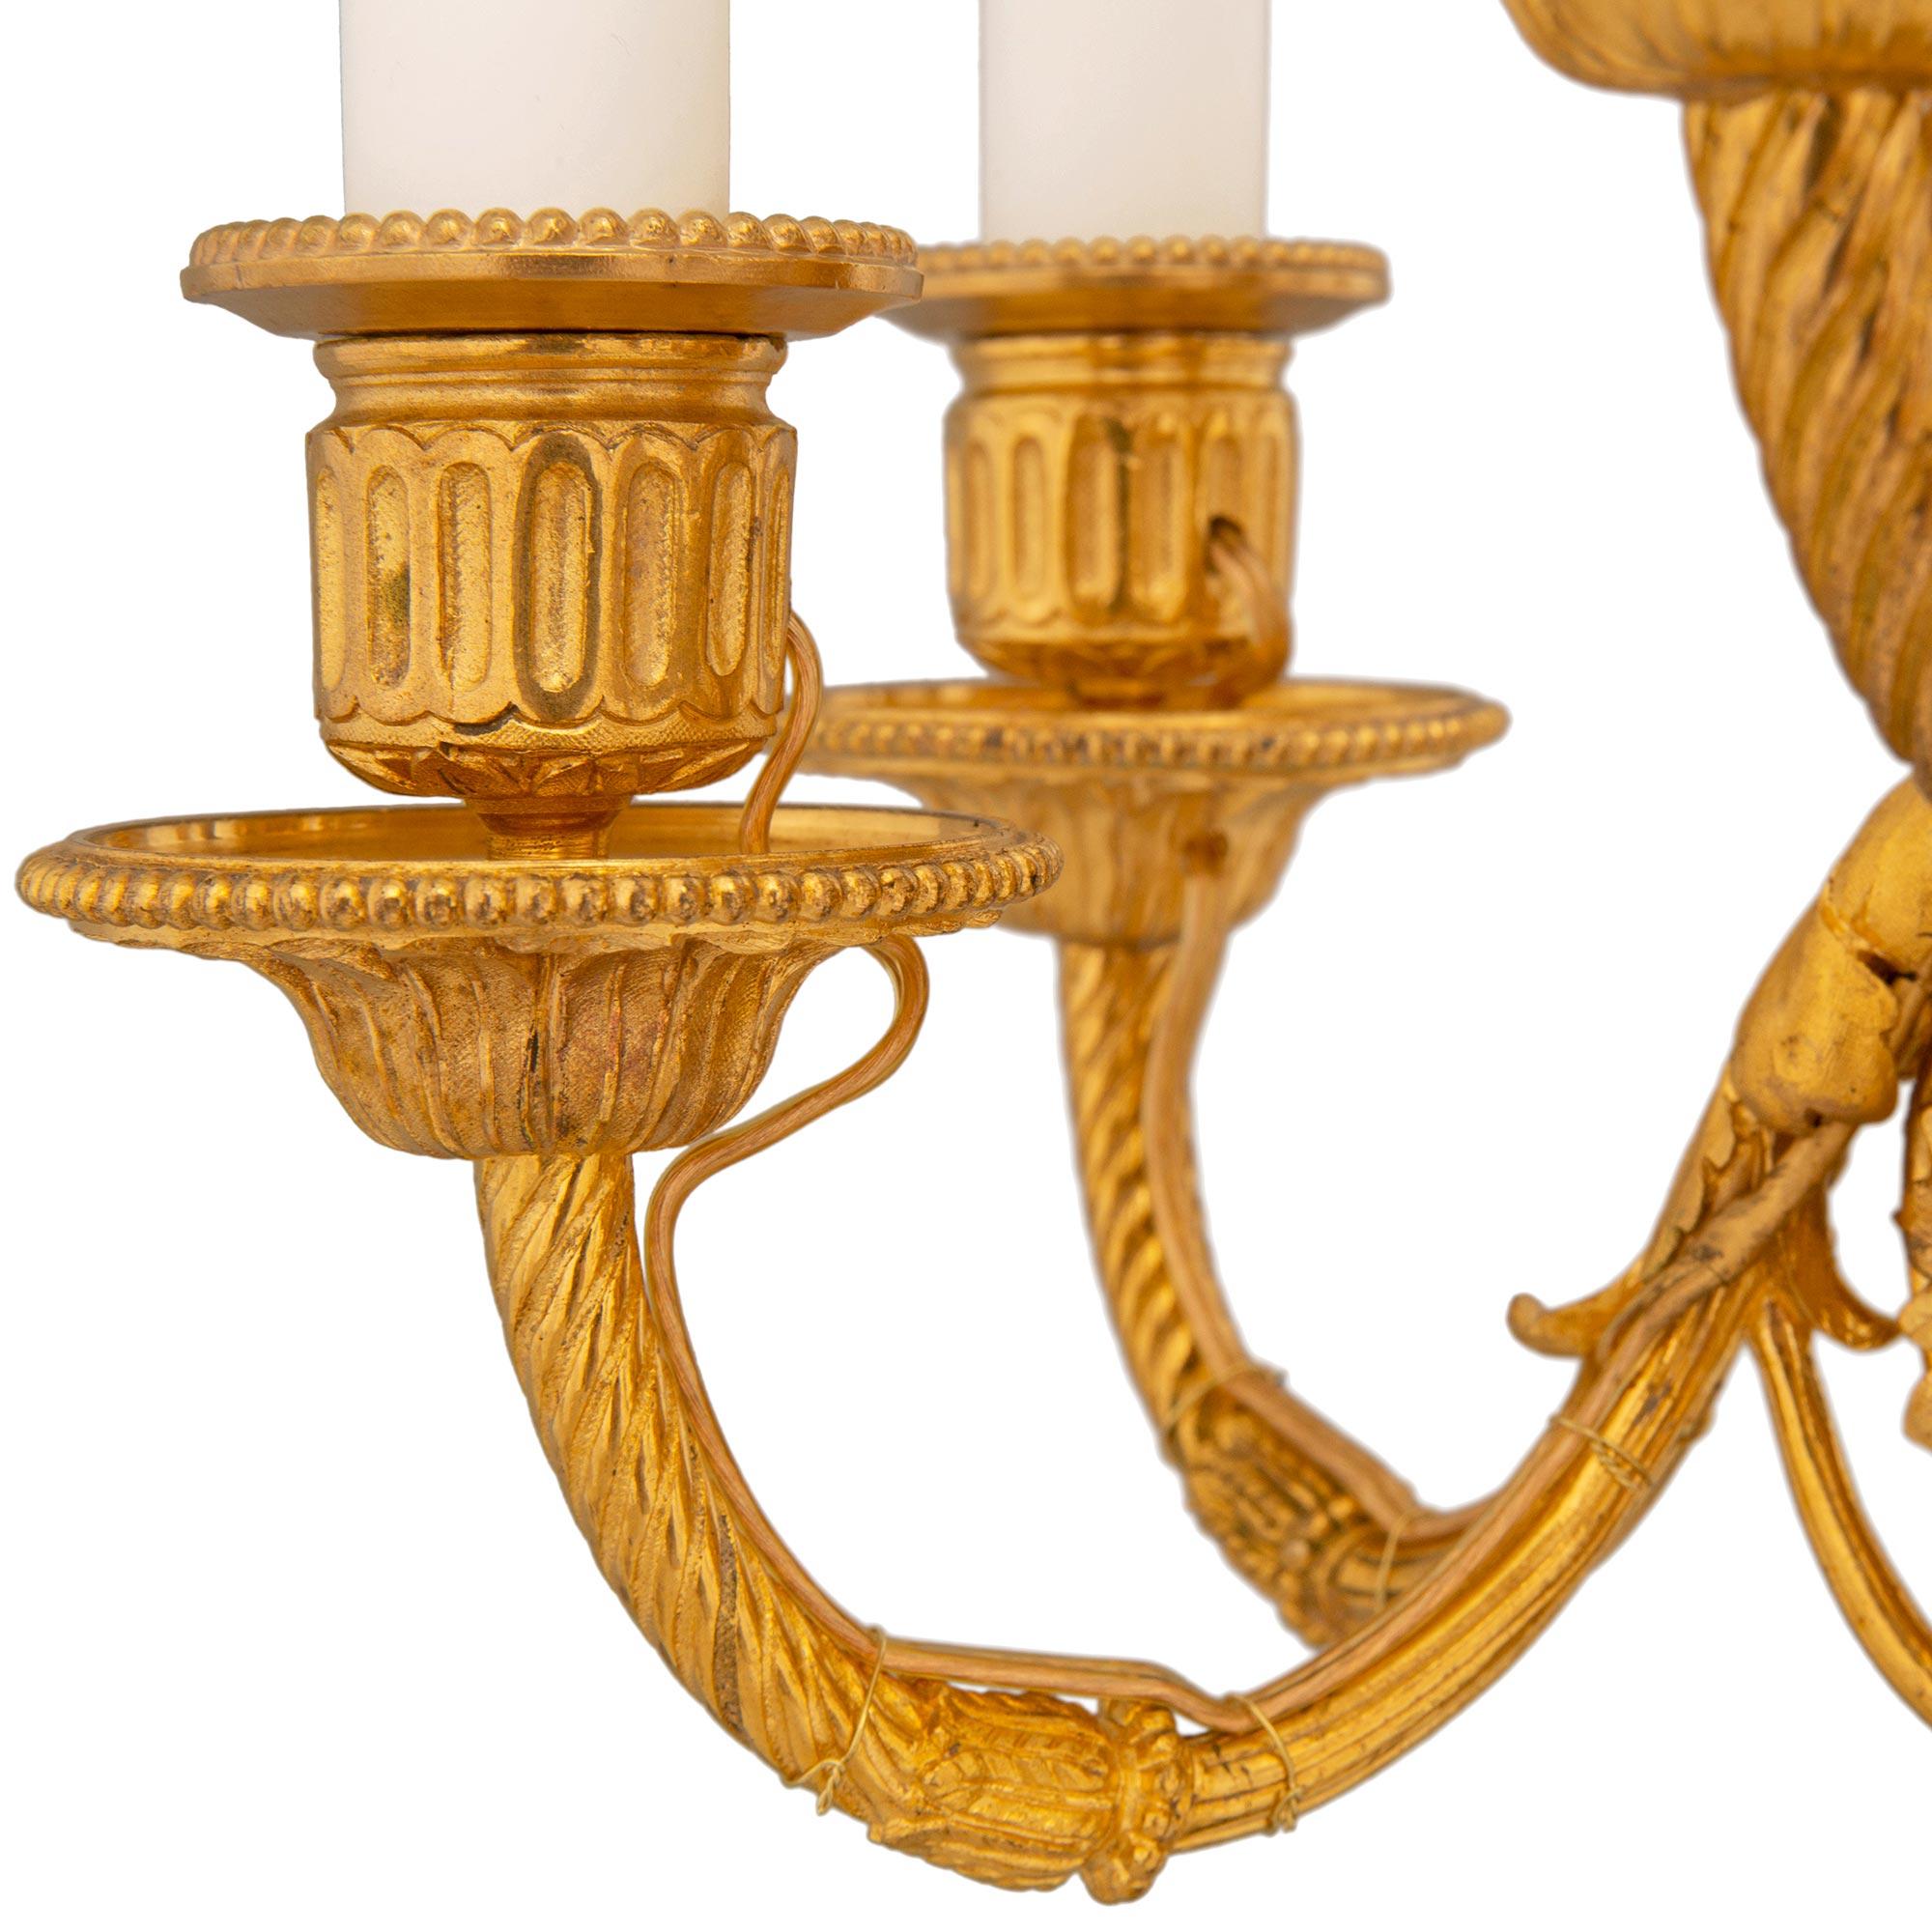 True Pair of French 19th Century Belle Époque Period Ormolu Candelabra Lamps For Sale 2